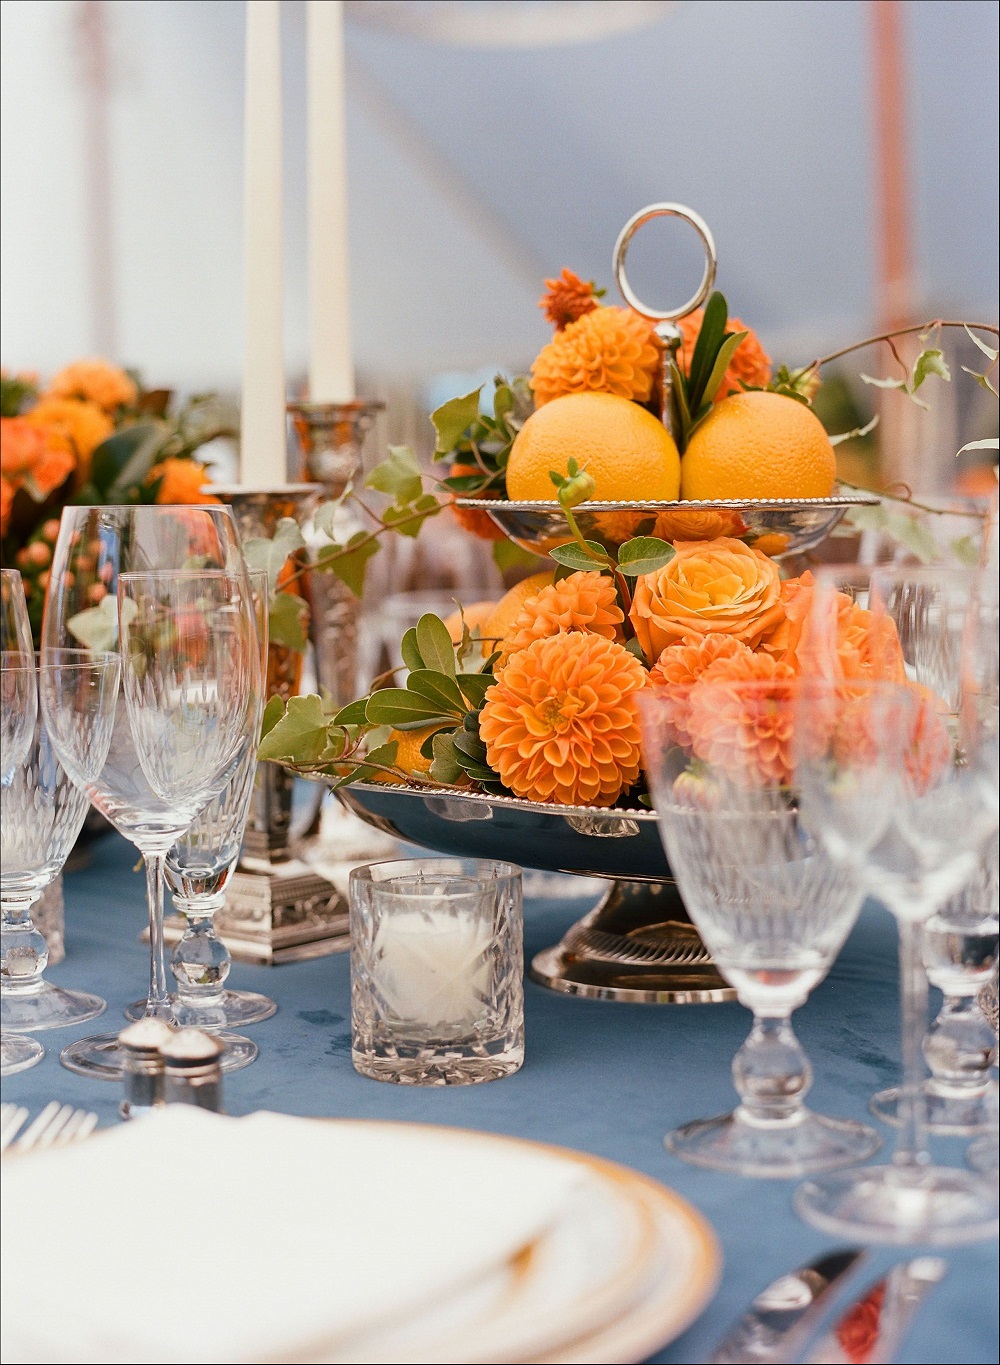 t3-67 Thanksgiving decorating ideas that will make your home look great